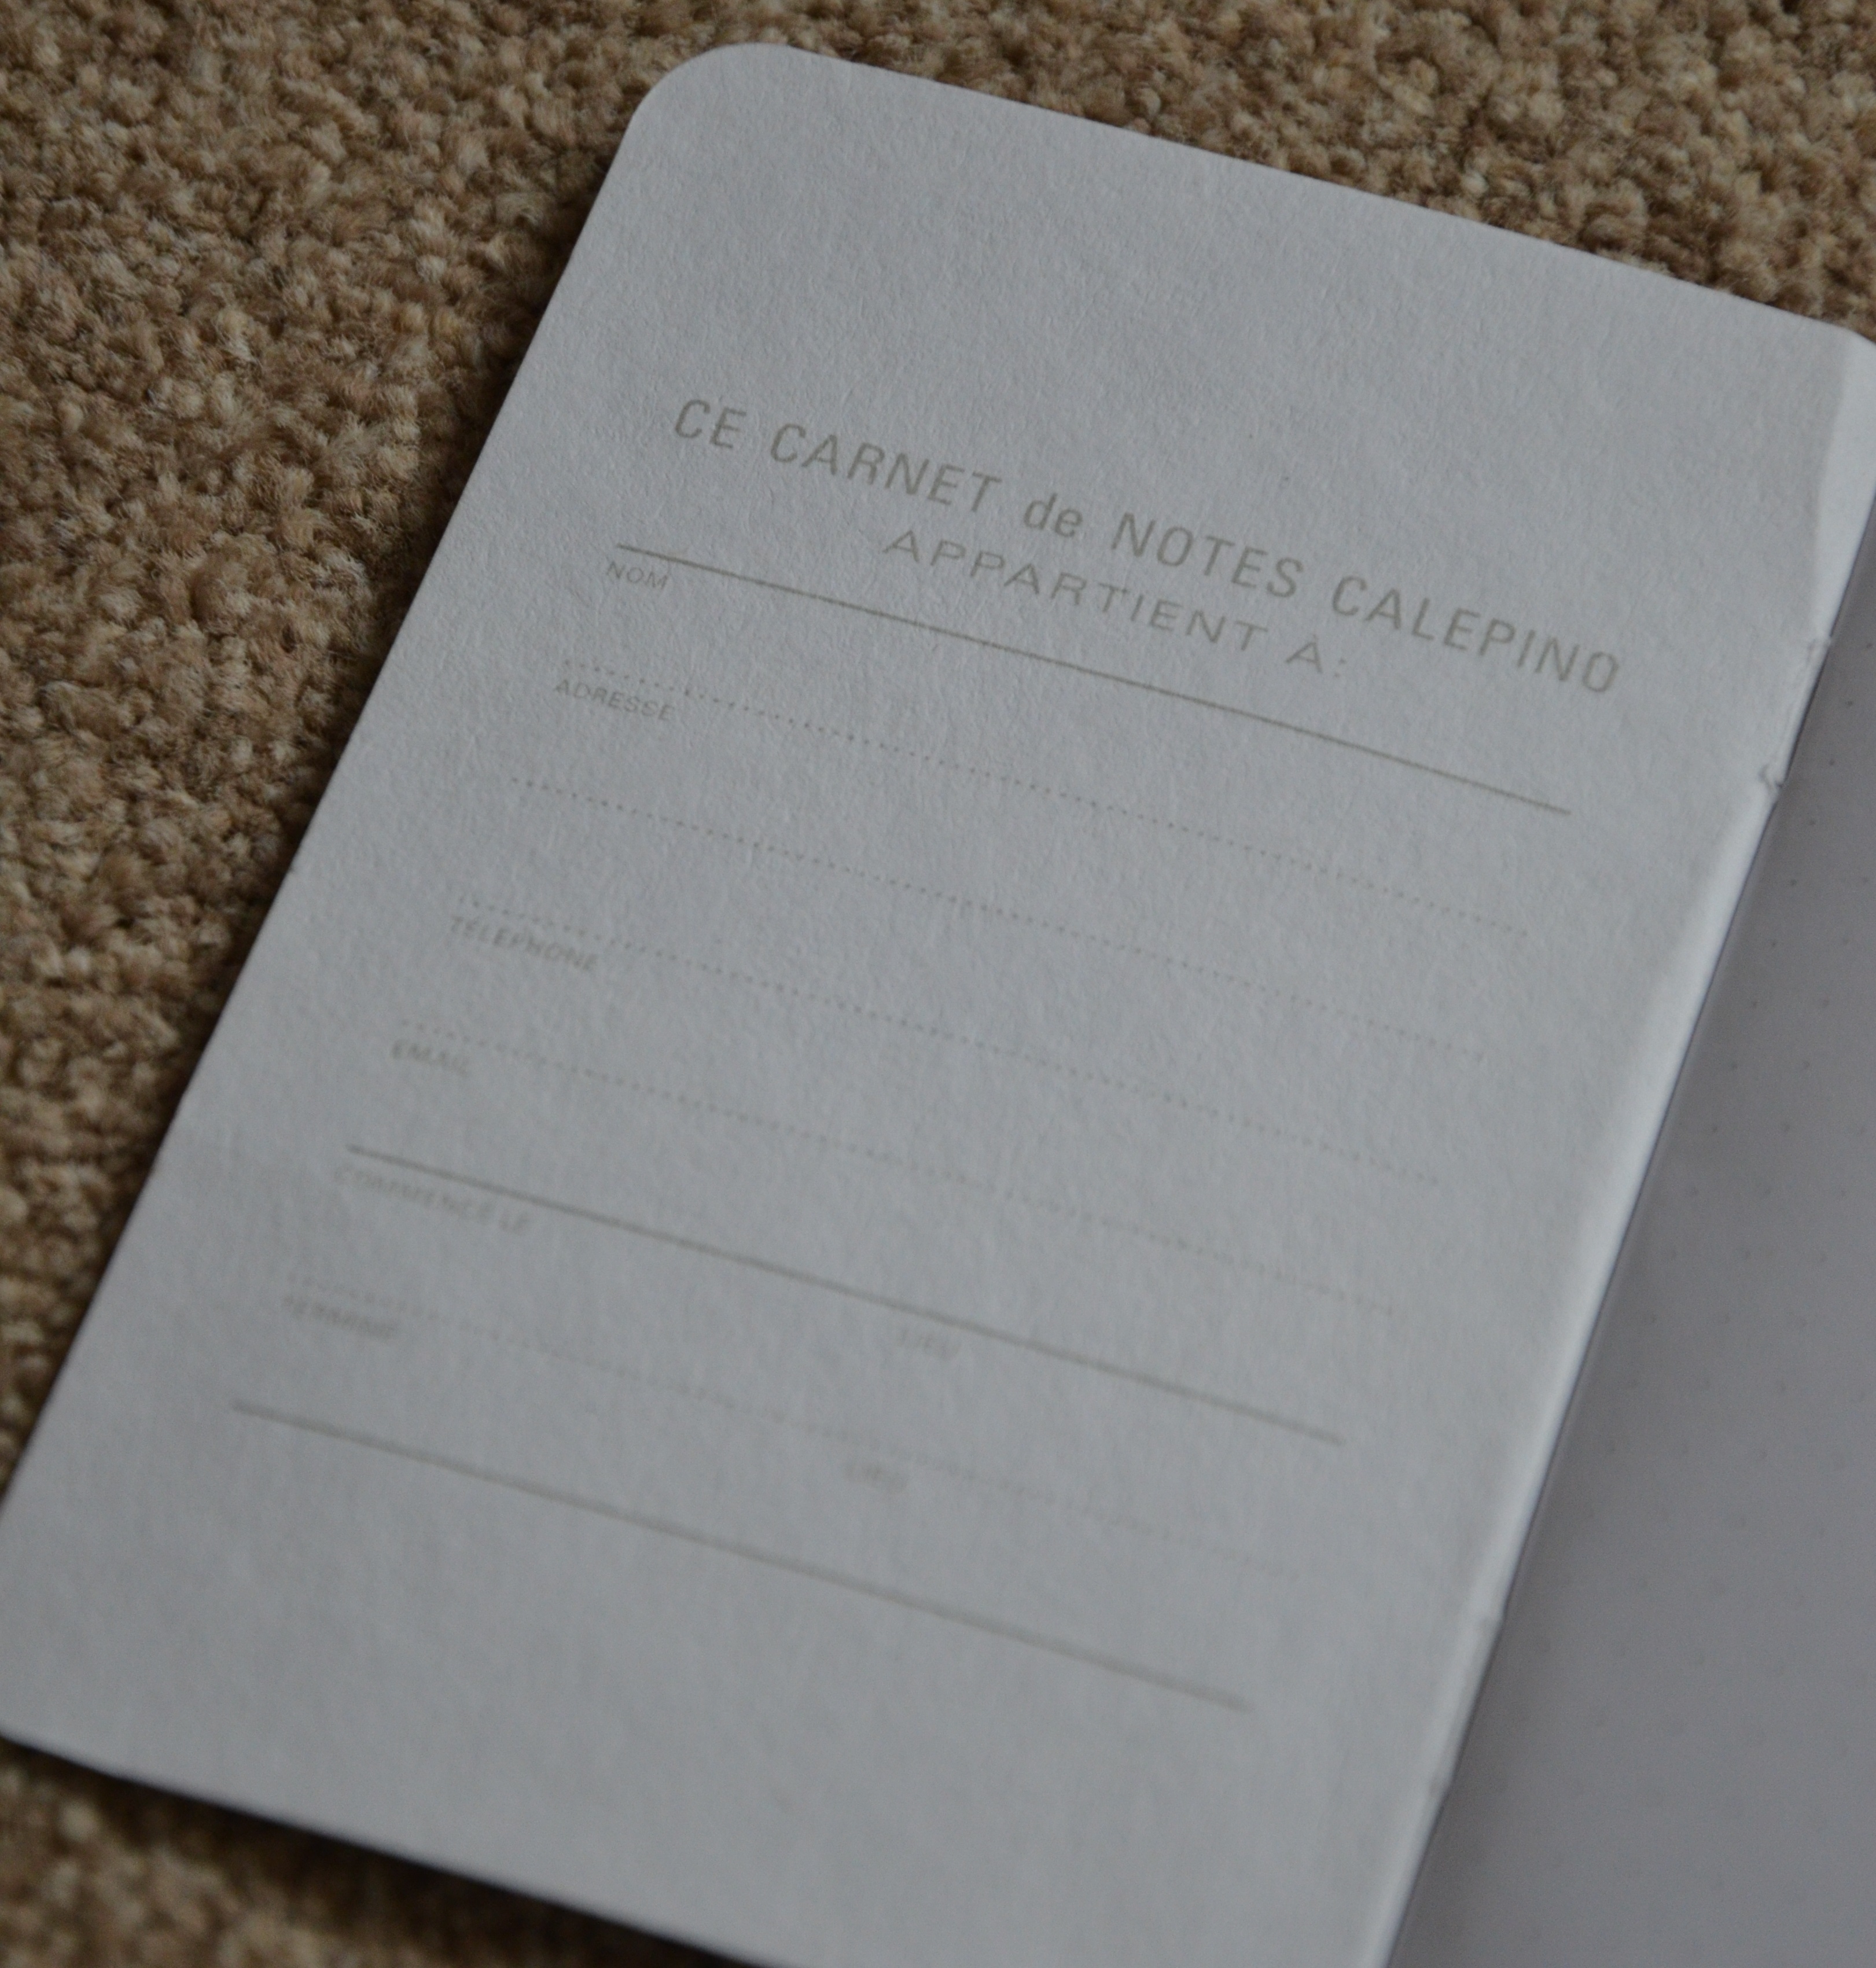 Inside the Front Cover of the Calepino Notebook